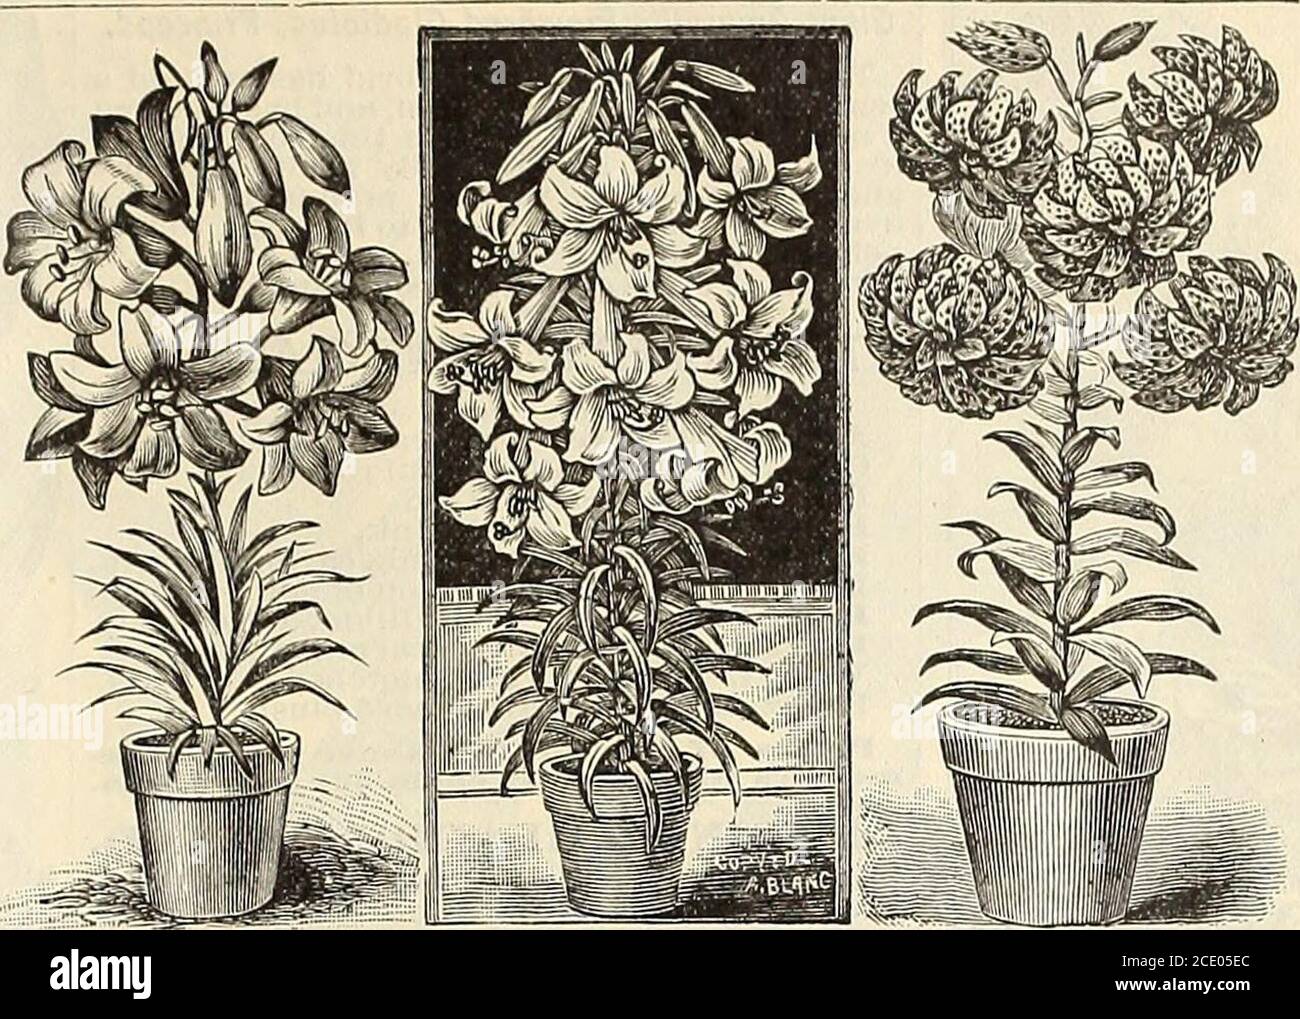 . The Maule seed book for 1905 . Hardy Qarden Lilies.. Lily Umbellatum. Lily, Alexandraea. Double Tioer Lily. Auratum. The Golden-RayedLily of Japan; 8 to 5 feet high.Its dellclously fragrant flowers arenearly a foot wide when fully ex-panded, and are produced In profu-sion. The colors and markings ofthis niagniflcent Uly surpass allothers. The flowers are pure white,spotted with chocolate crimson, audeach petal banded with golden yel- low. 15c. each; 2 for 25c.; $1.25 per doz. Alexandraea. A dwarf, purewhite Lllium Auratum, withoutspots, having dark brown anthers,and a perfume that is pleasan Stock Photo